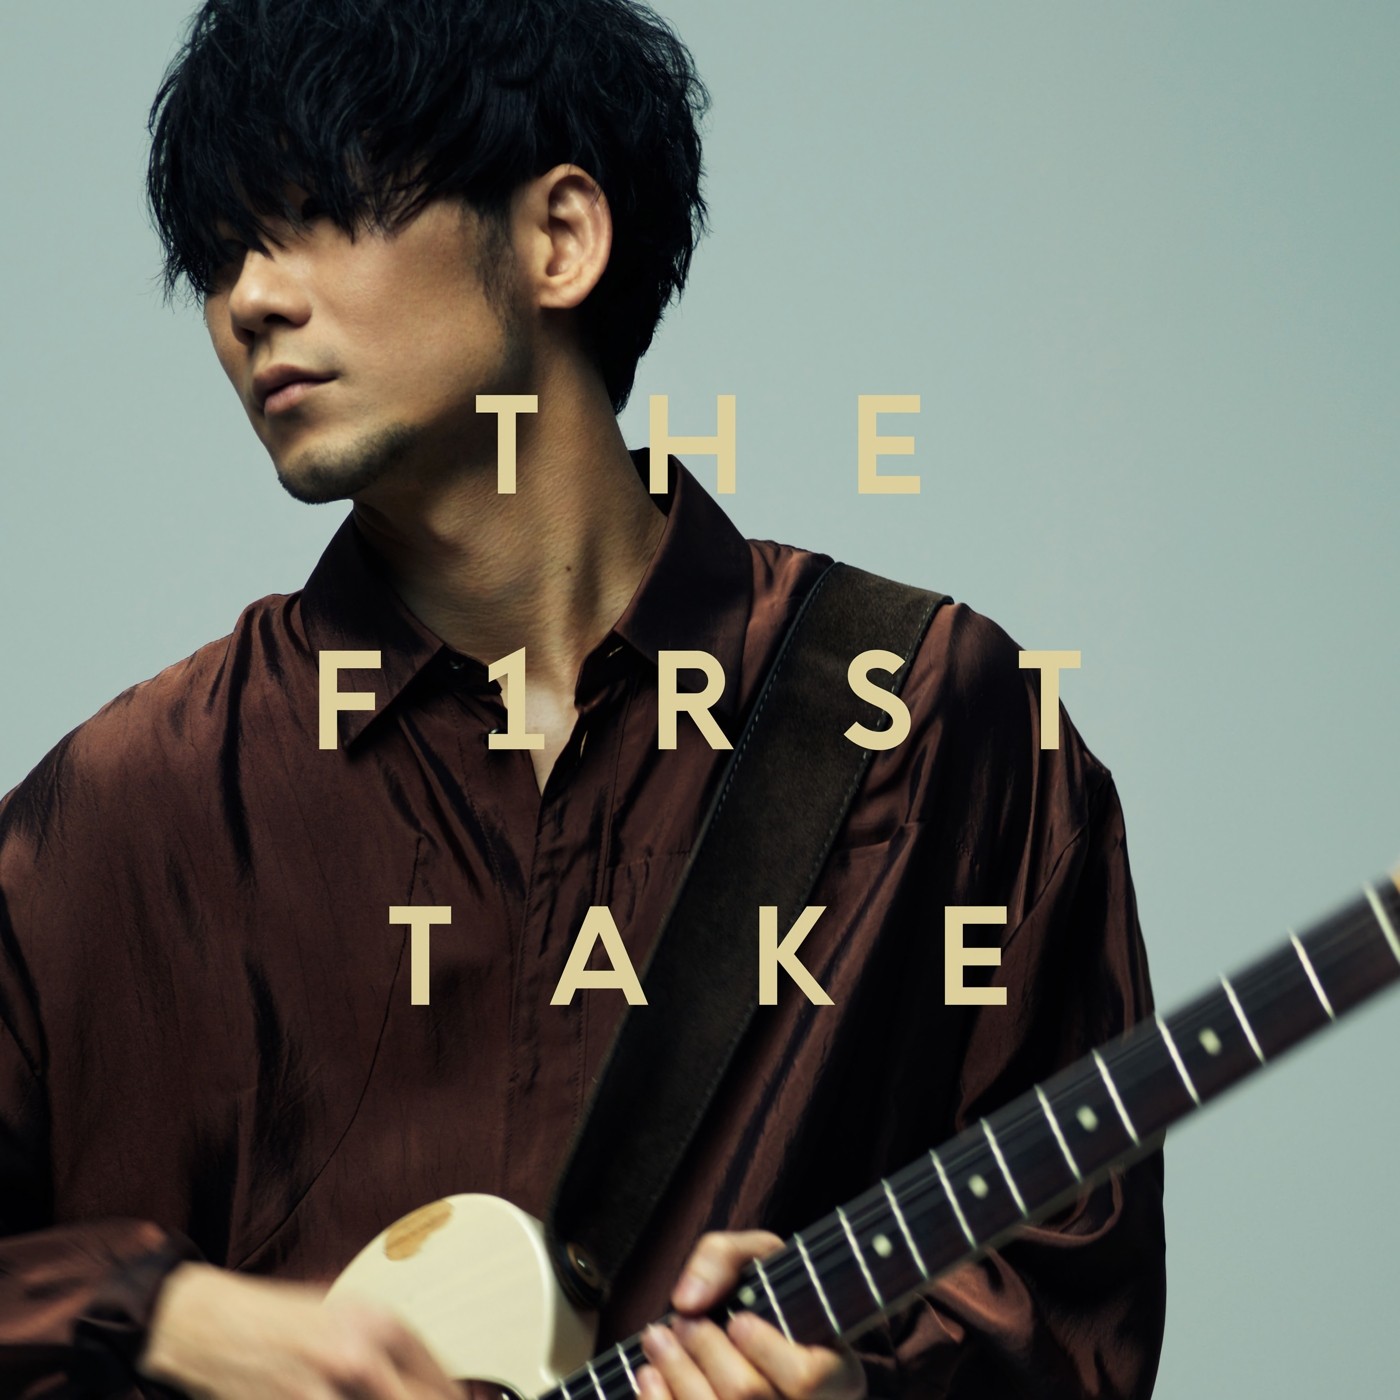 TK from 凛として時雨 – copy light – From THE FIRST TAKE [FLAC 24bit/96kHz]